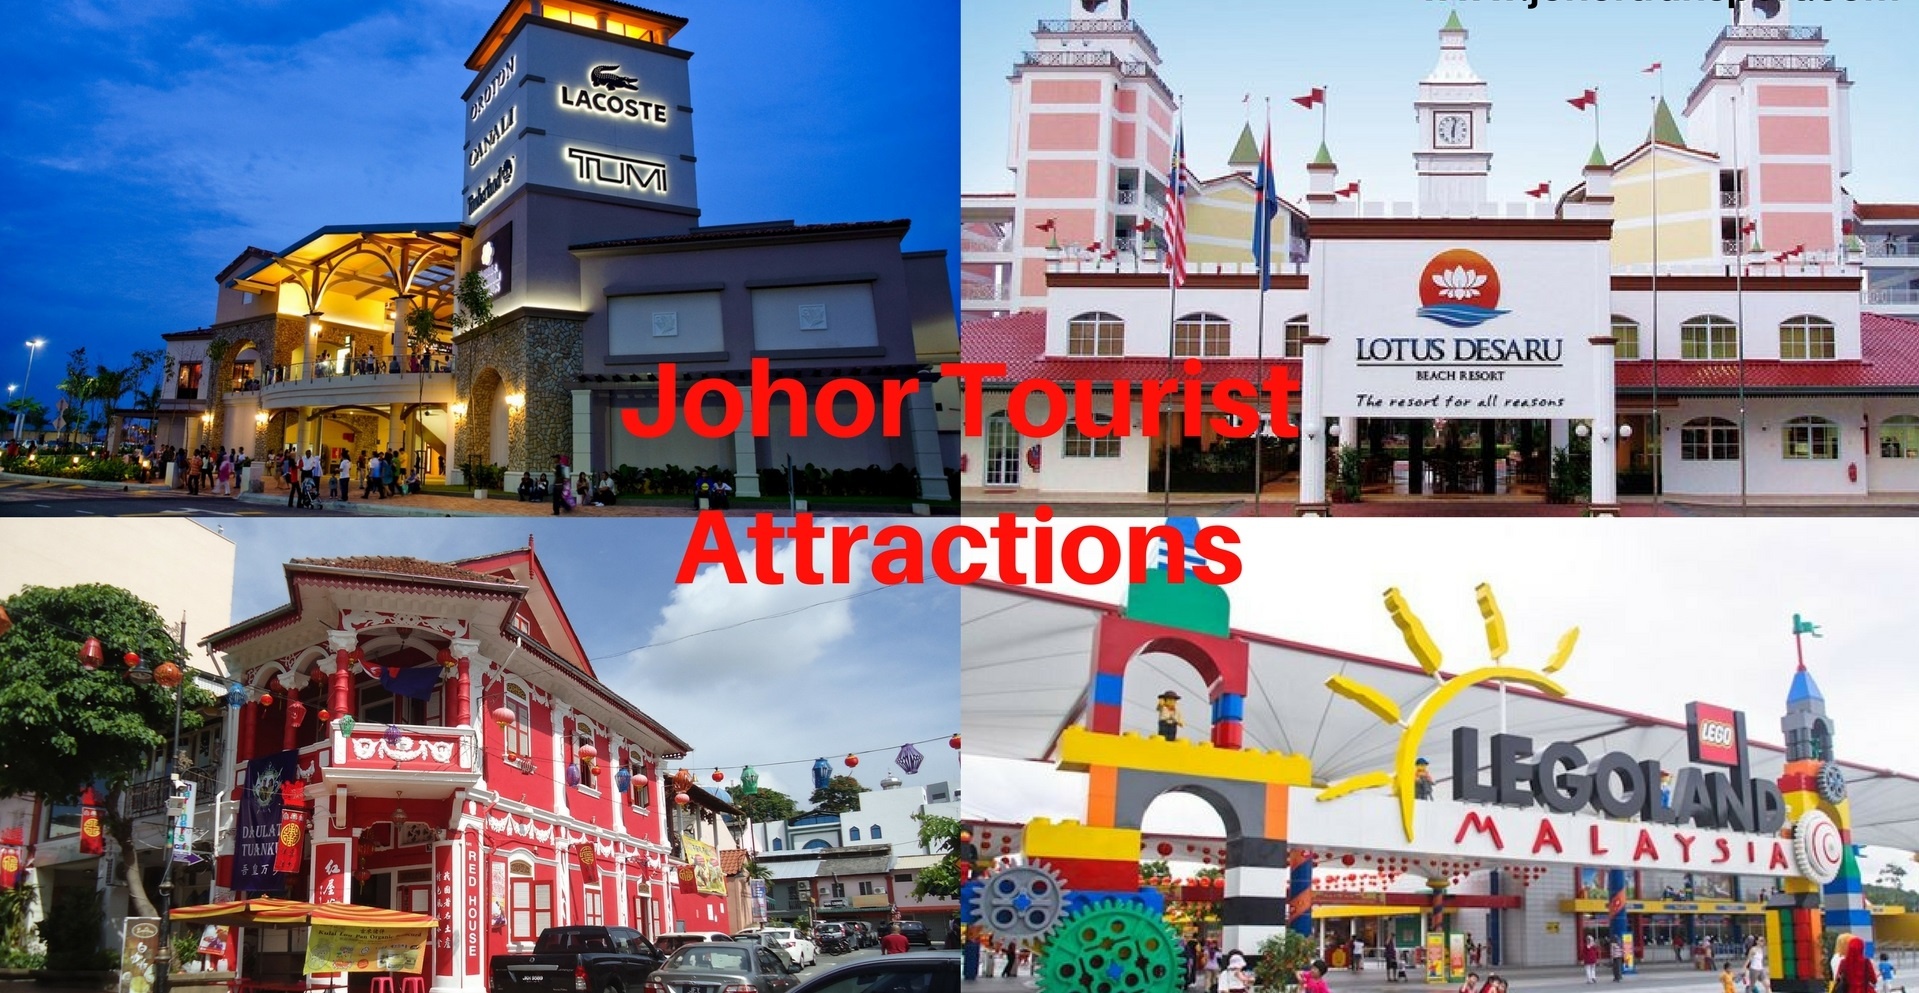 Johor Tourist Attractions Hotel 81 Lucky